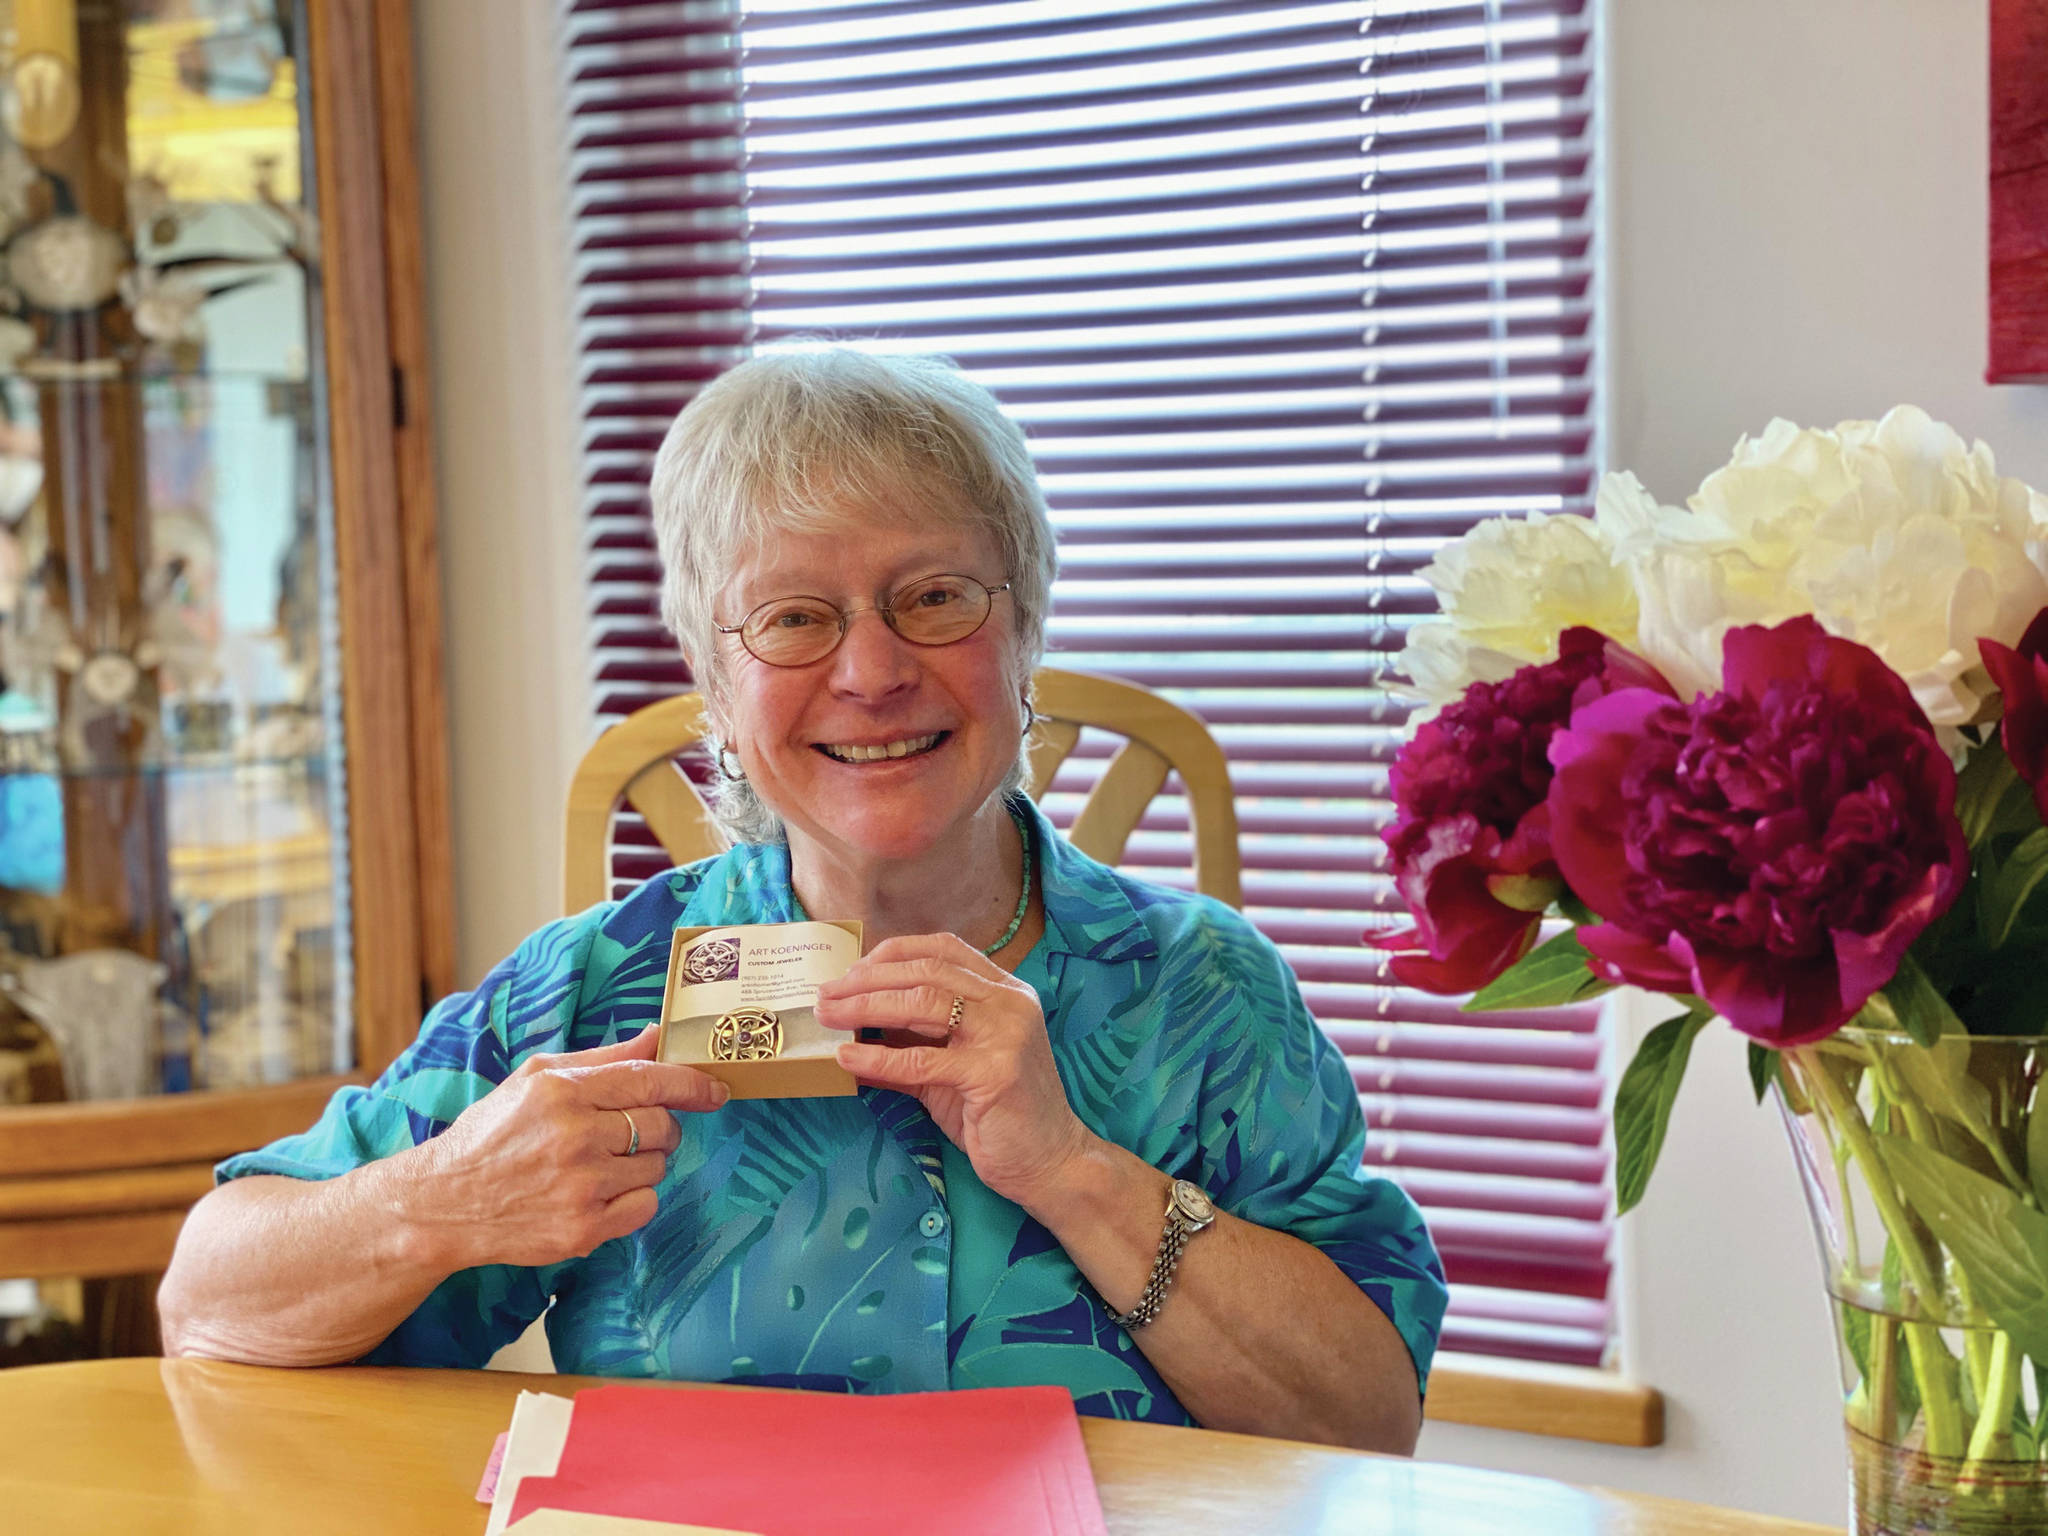 Woman of Wisdom Roberta Highland holds her award from South Peninsula Haven House in this photo taken July 25, 2020, in Homer, Alaska. (Photo courtesy South Peninsula Haven House)